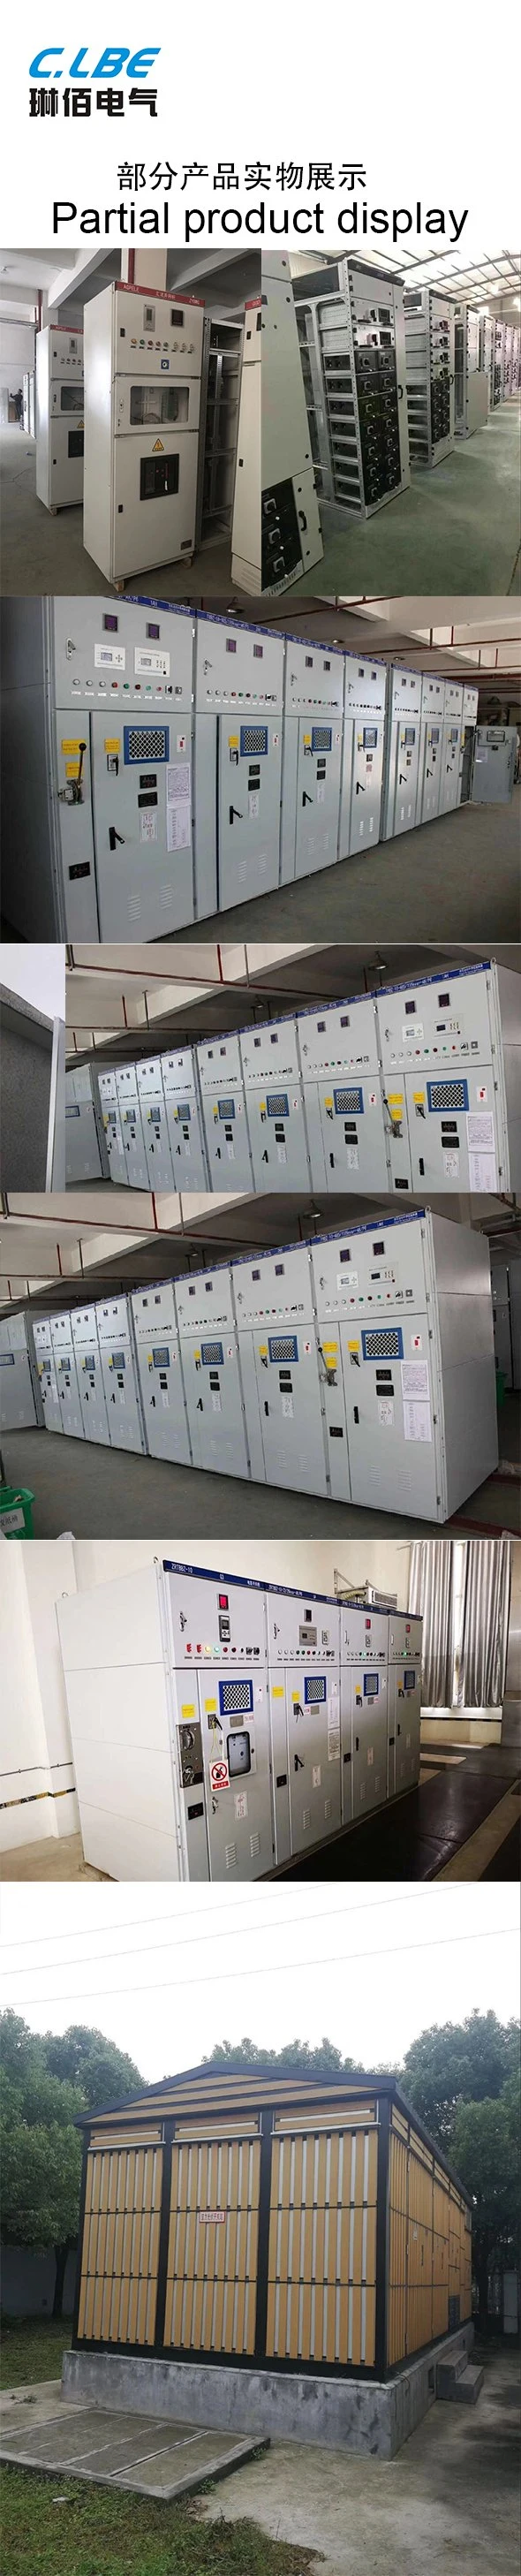 Zgs Solar Distribution Box Photovoltaic Wind Boost Substation